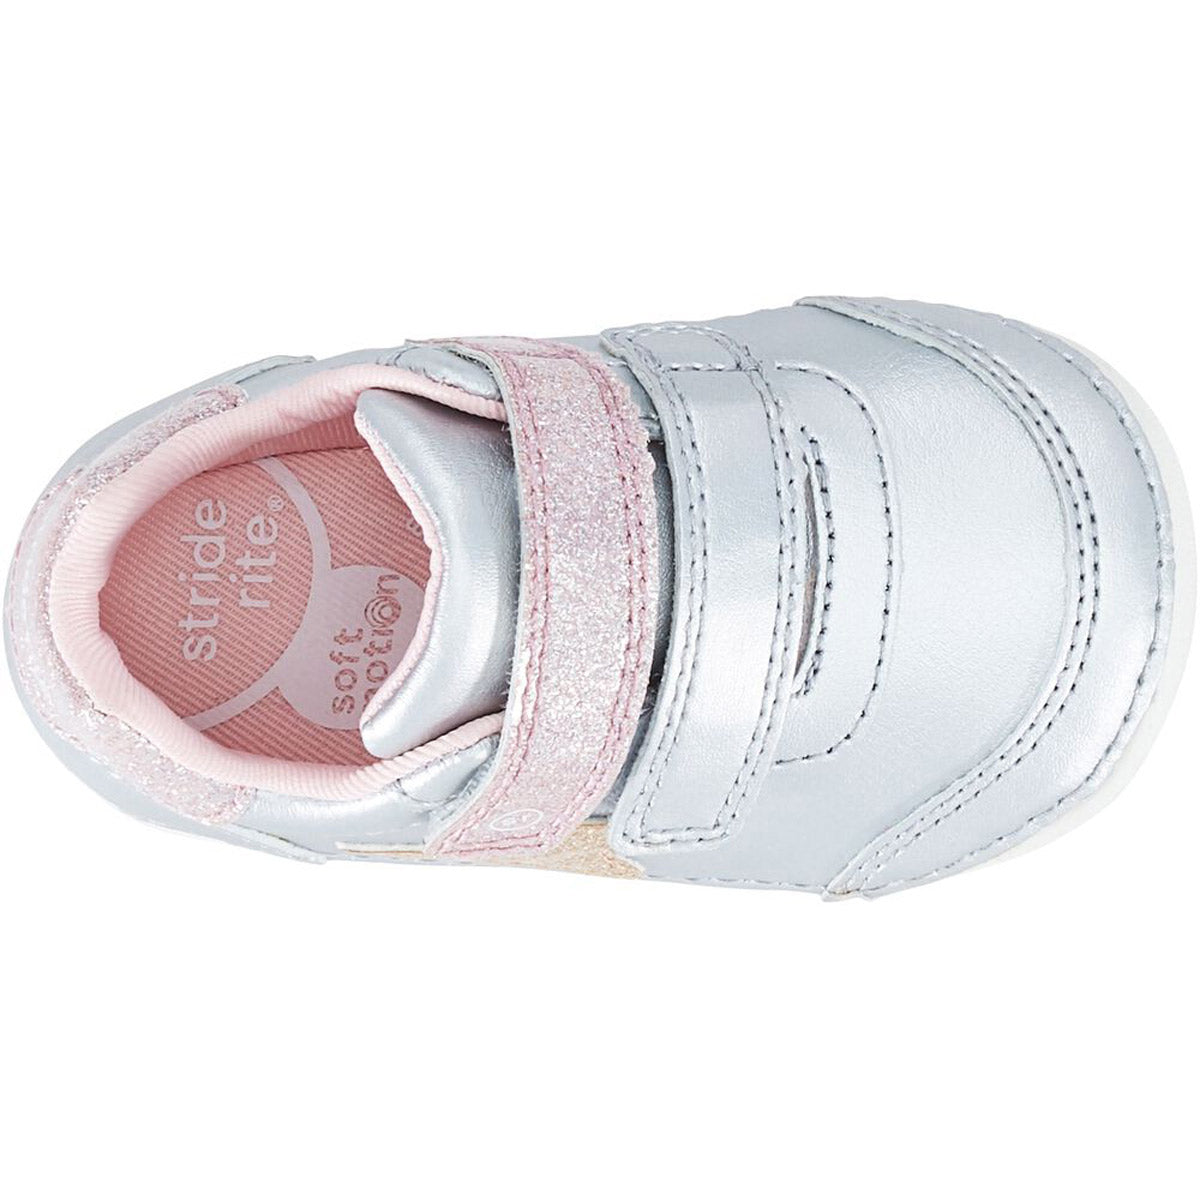 A single Stride Rite SM Kennedy Silver Multi toddler shoe with an adjustable double hook and loop closure.